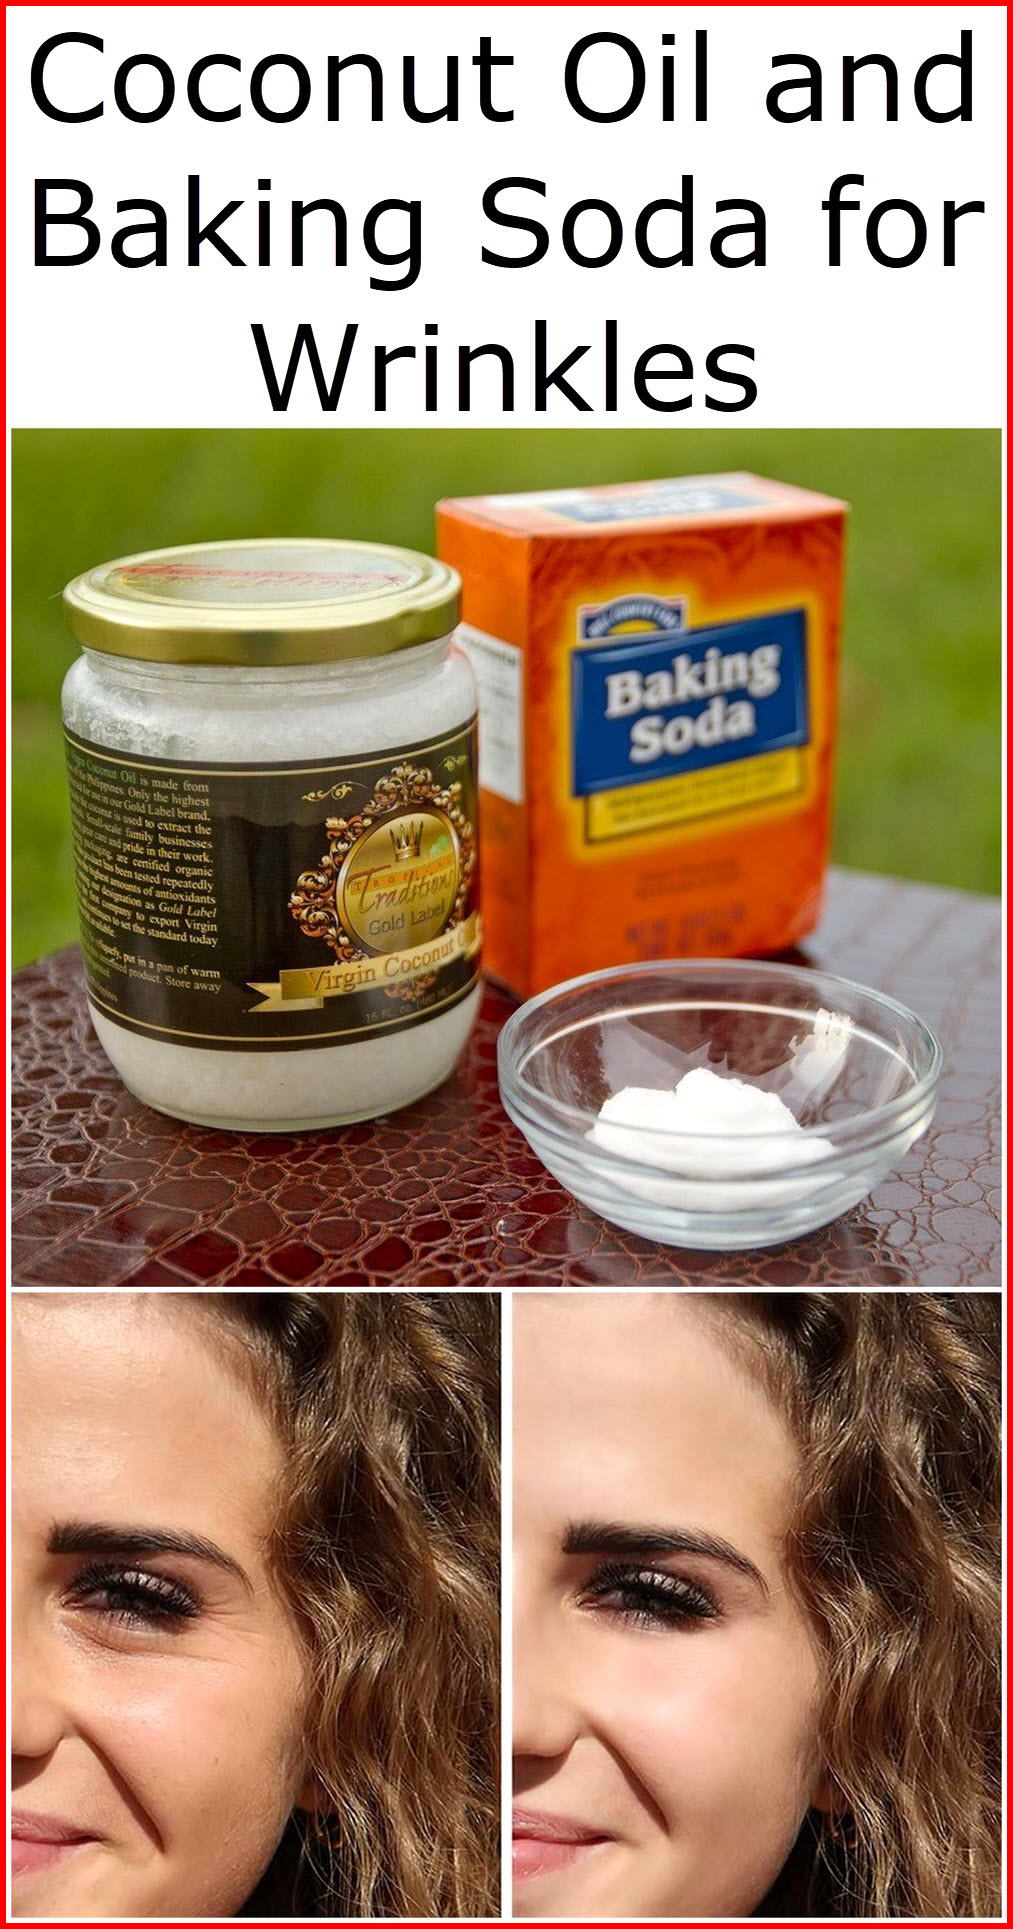 Coconut Oil and Baking Soda for Wrinkles